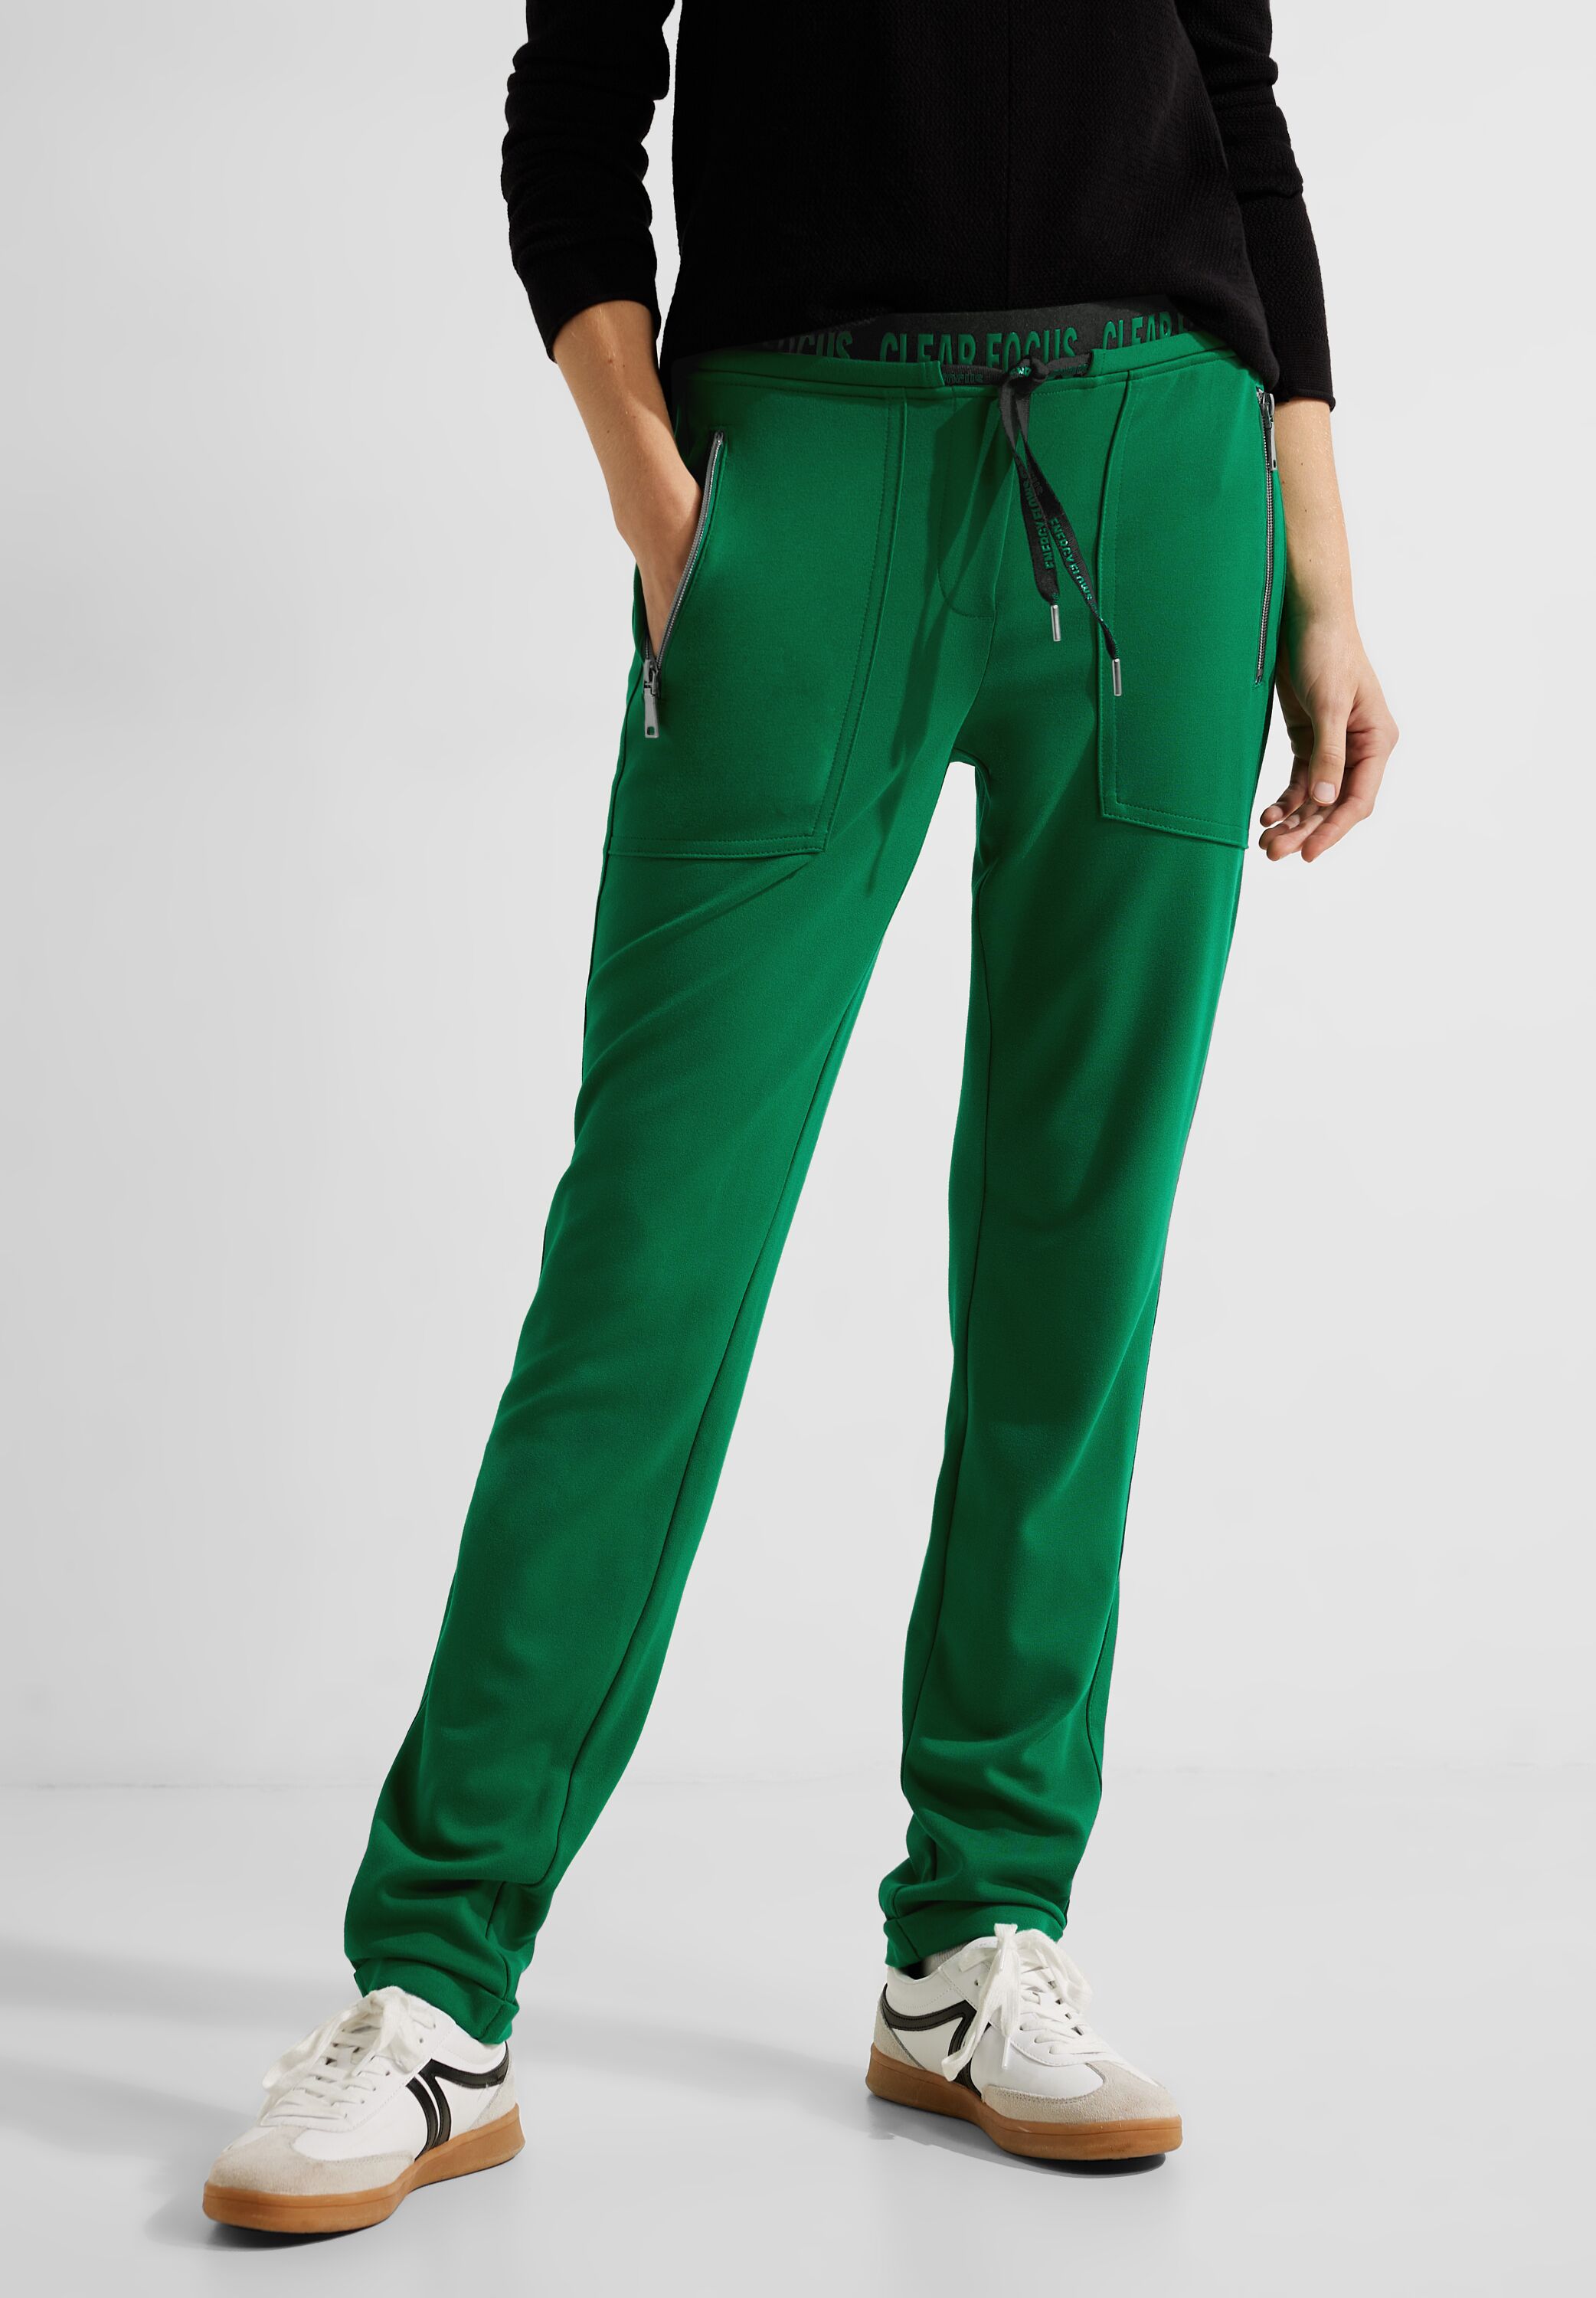 CECIL Joggpant Tracey in Easy Green im SALE reduziert B377015-15069 -  CONCEPT Mode